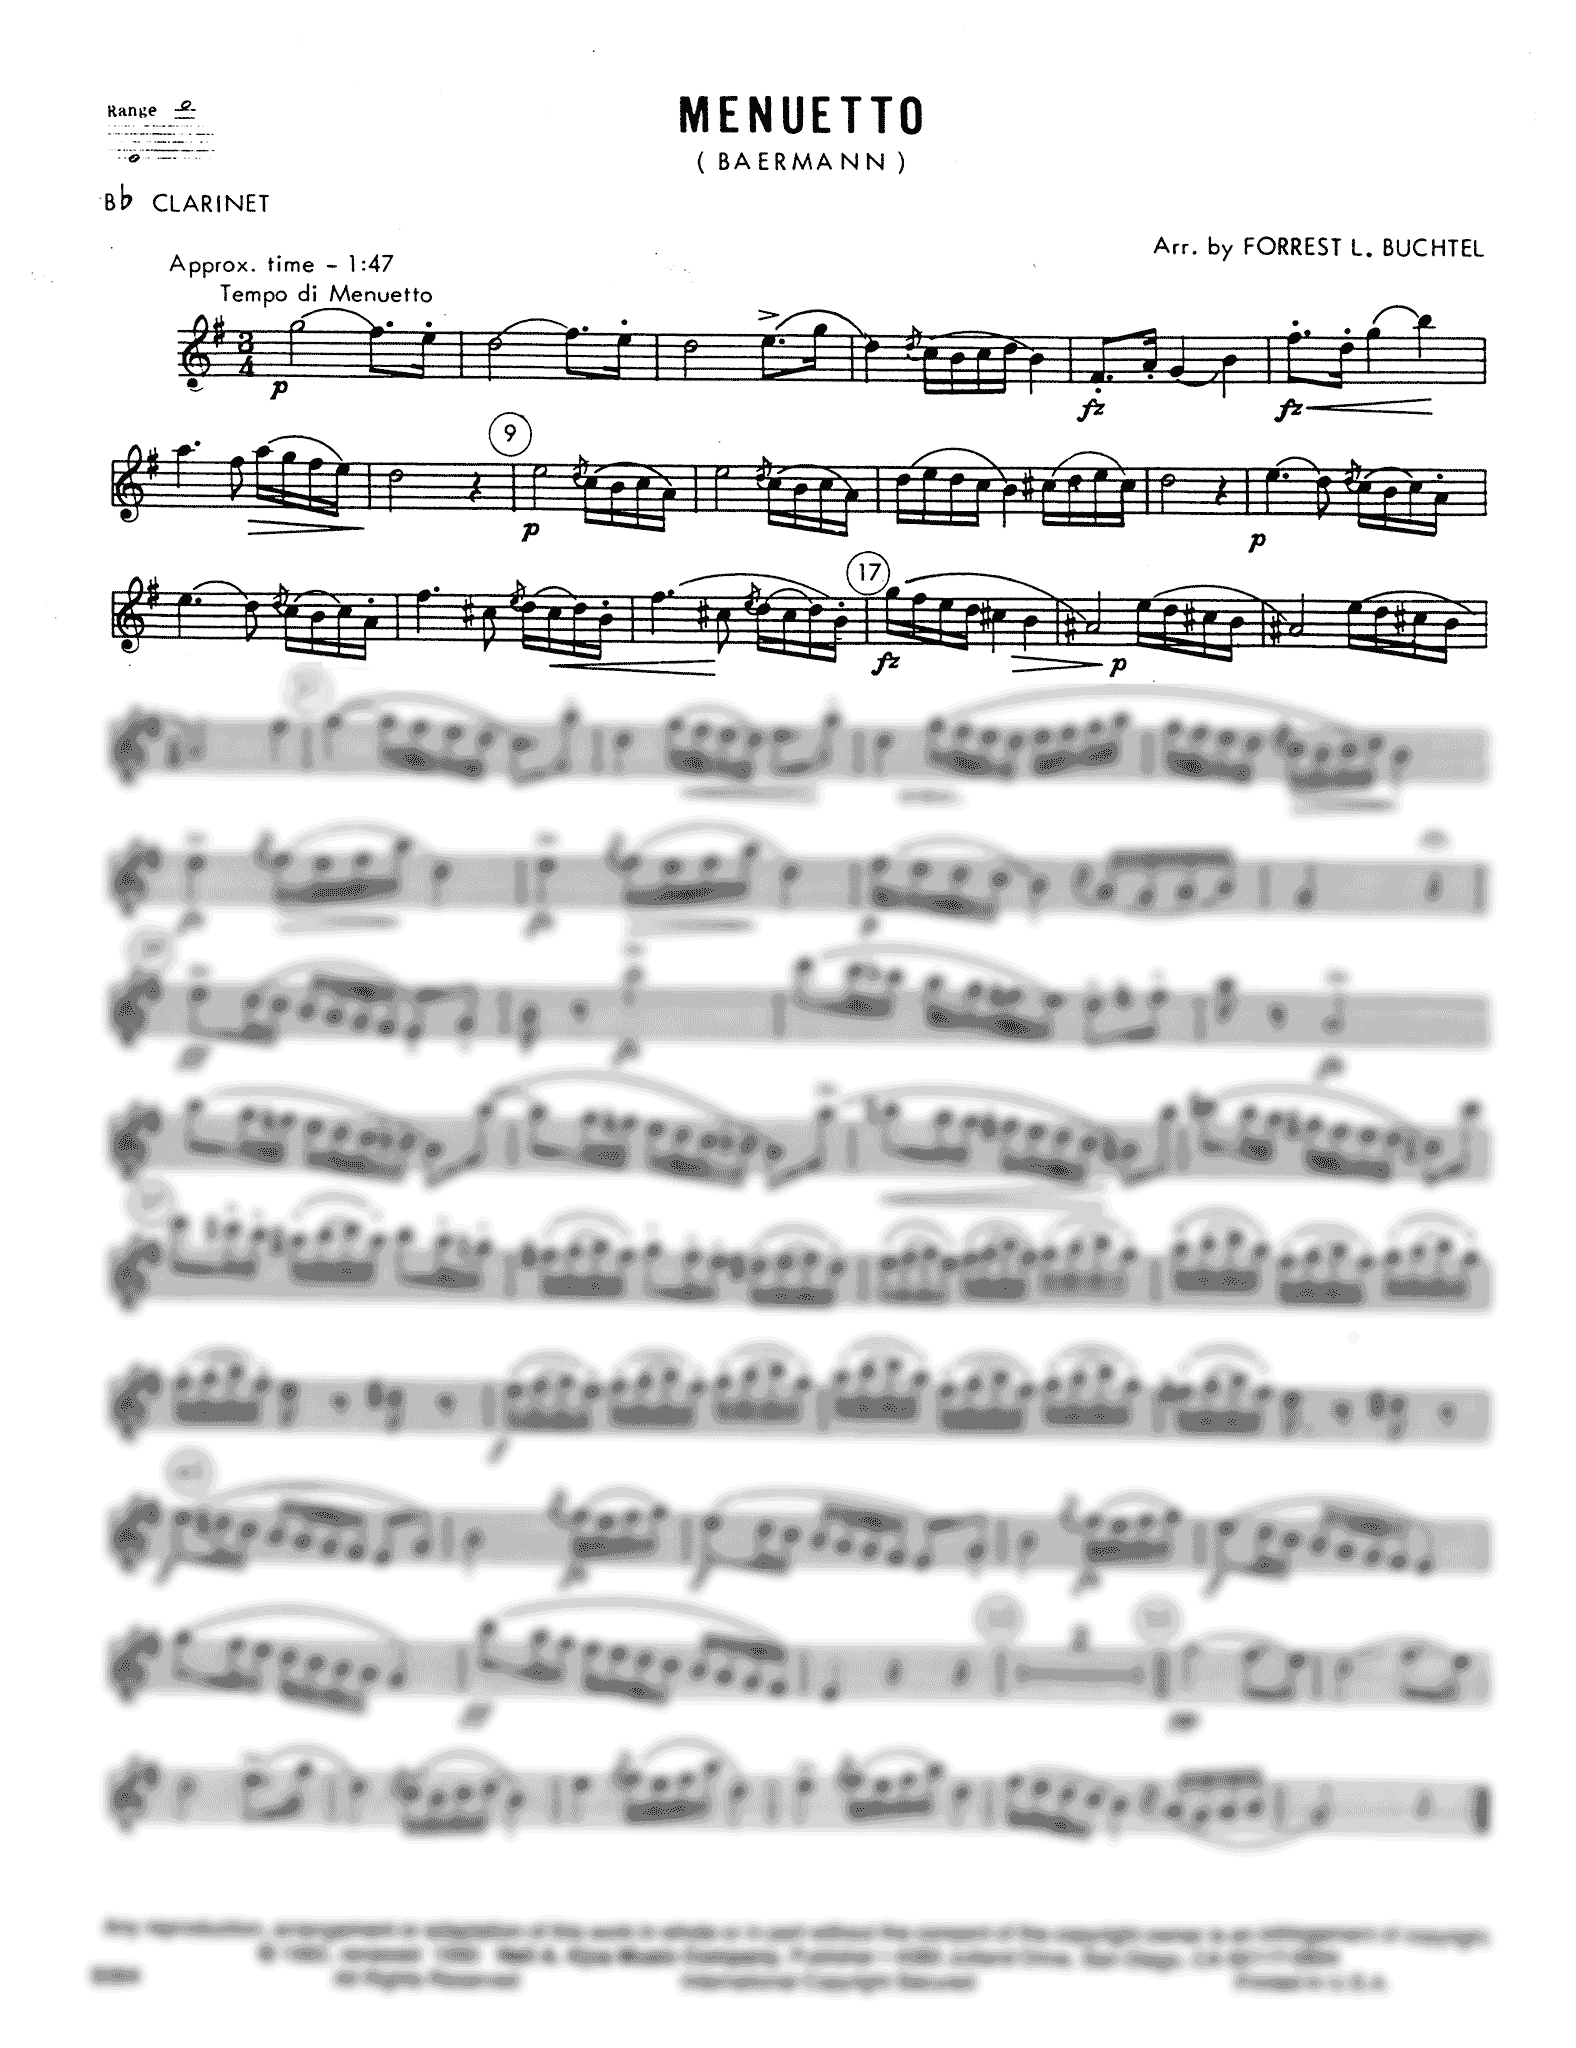 Baermann Menuetto from Clarinet Method, Op. 63, Div. II No. 19 solo part